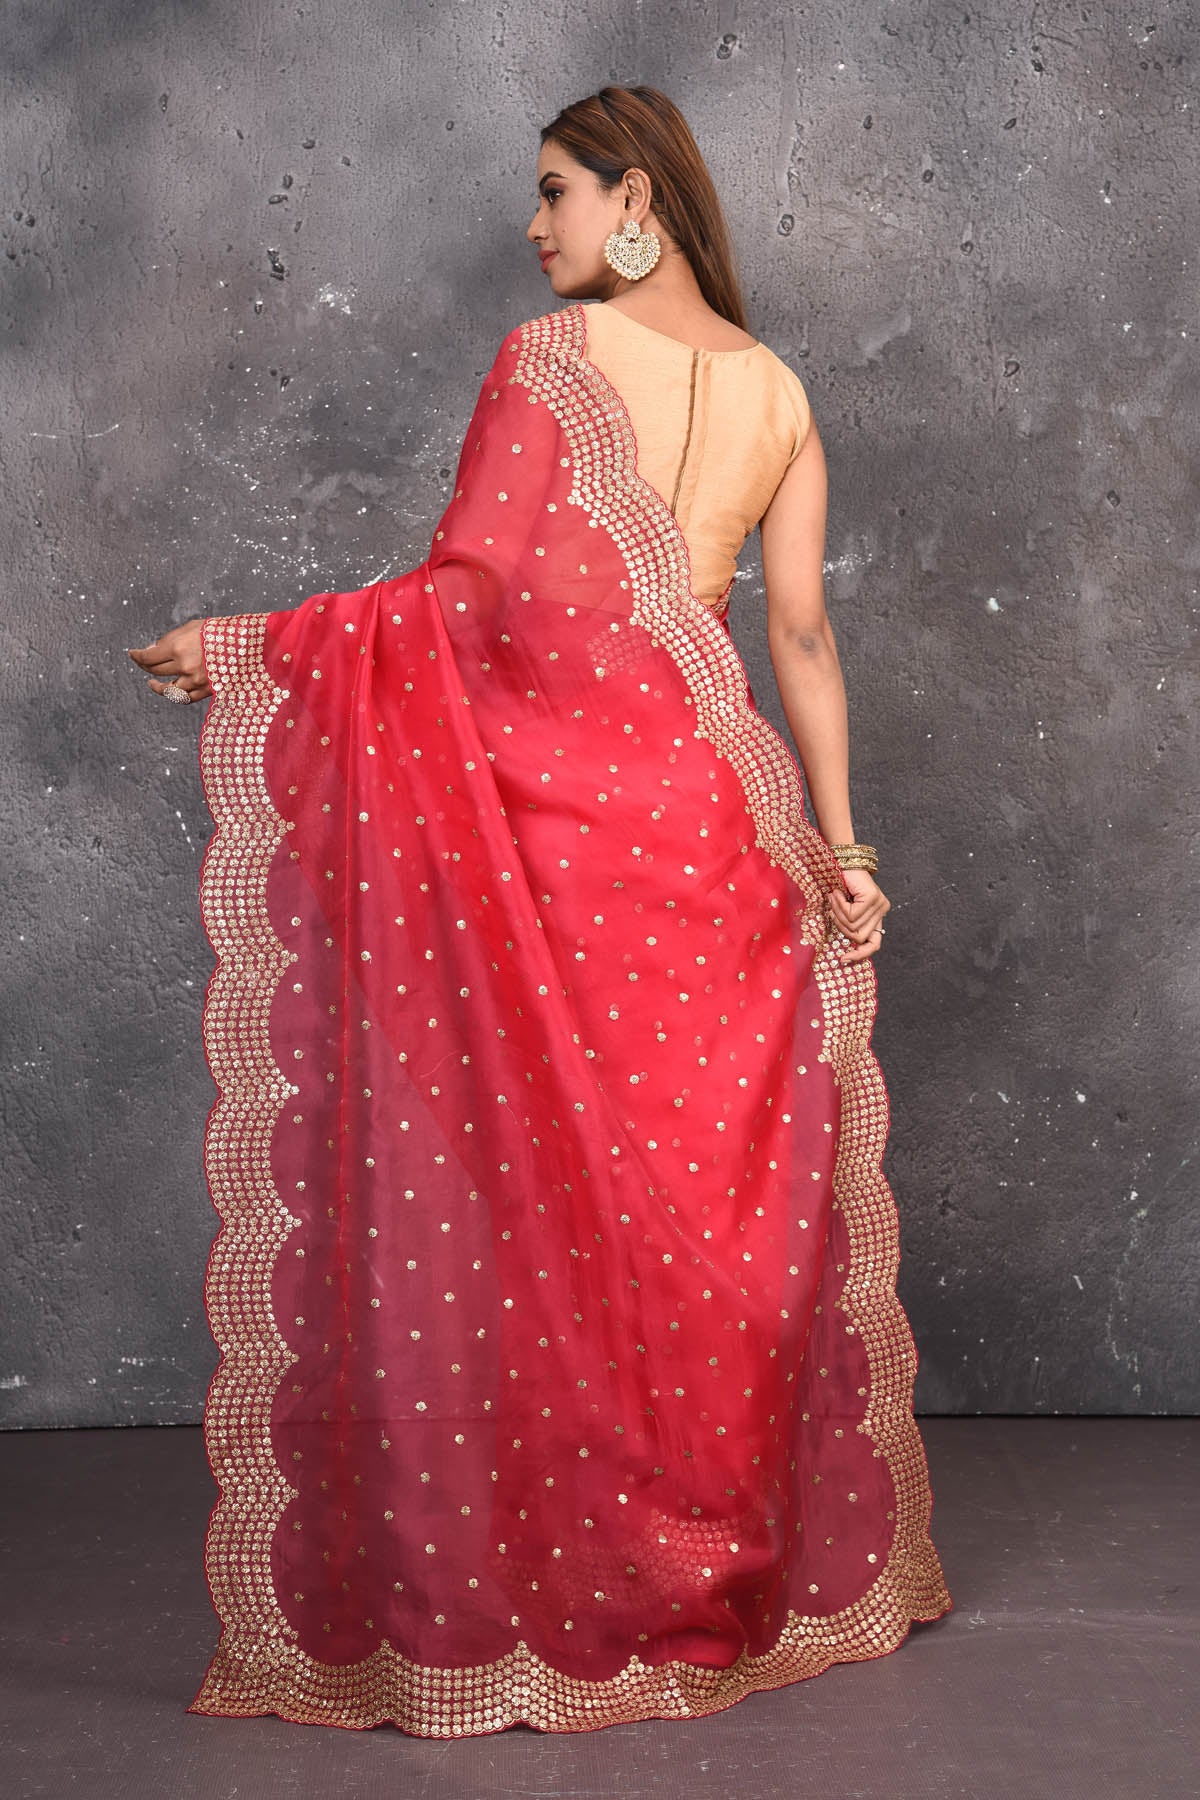 Buy exquisite pink organza saree with golden embroidered online in USA. Pure organza sarees by Pure Elegance in pink color. It has a beautiful gold embroidered border. This organza brings the charm and simplicity of this saree with border and pallu with the delegate embroidery work on border. Shop this designer silk sari from Pure Elegance Indian fashion store in USA.-Back view with open pallu.